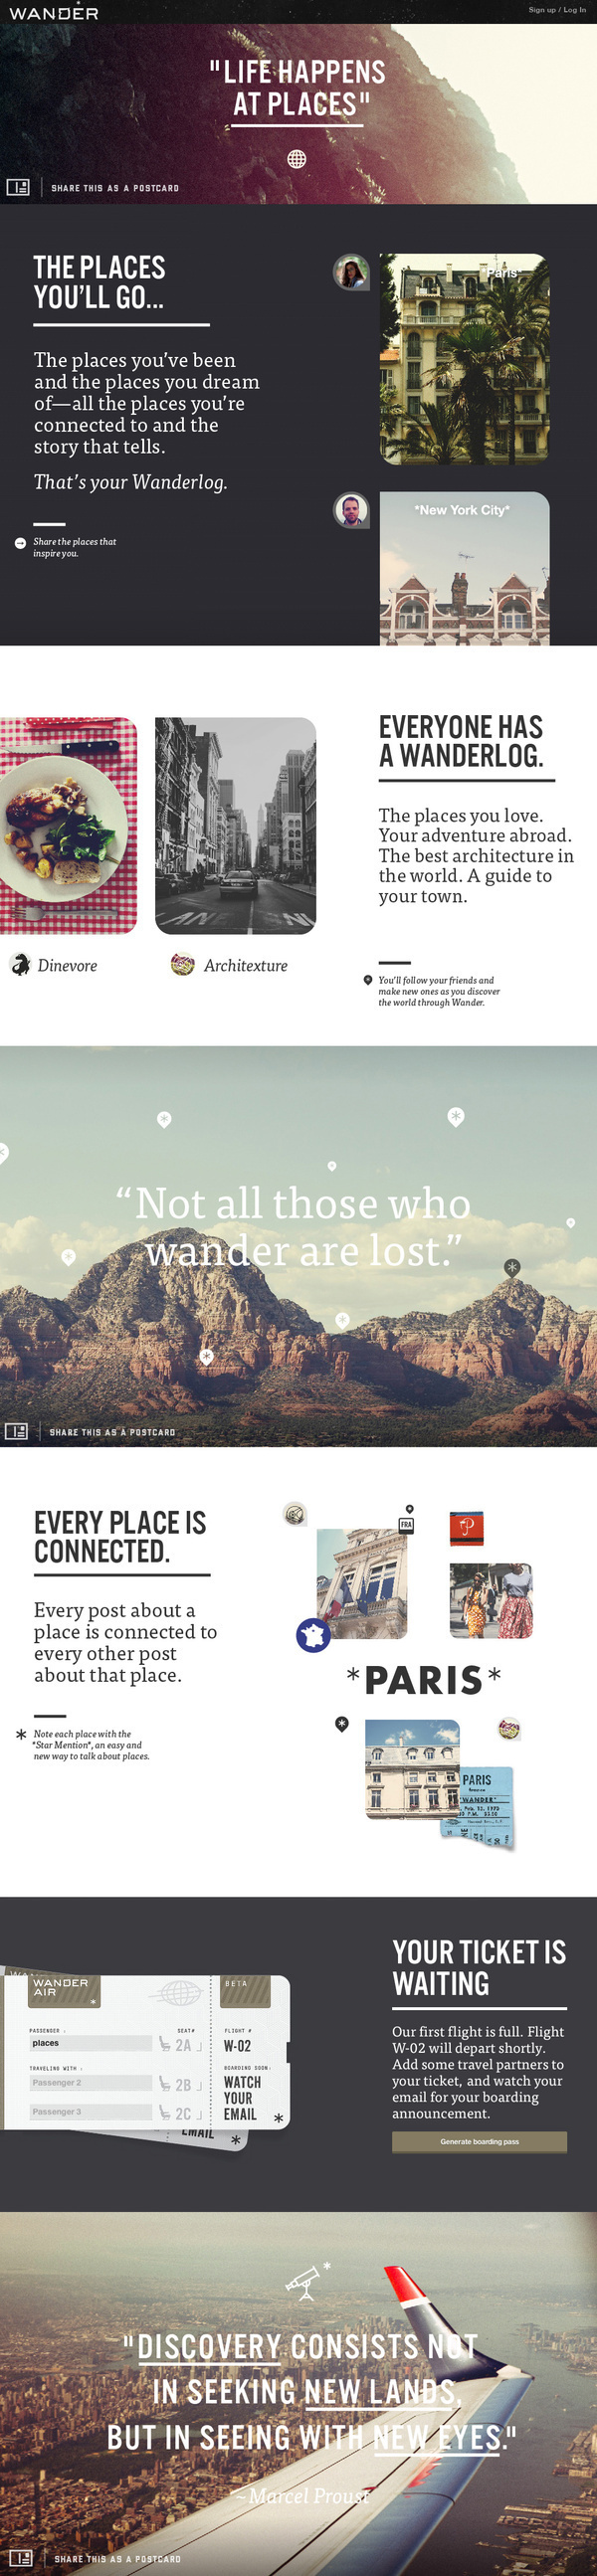 Product Page screen design idea #232: Wander Product Summary Page on Behance #website #travel